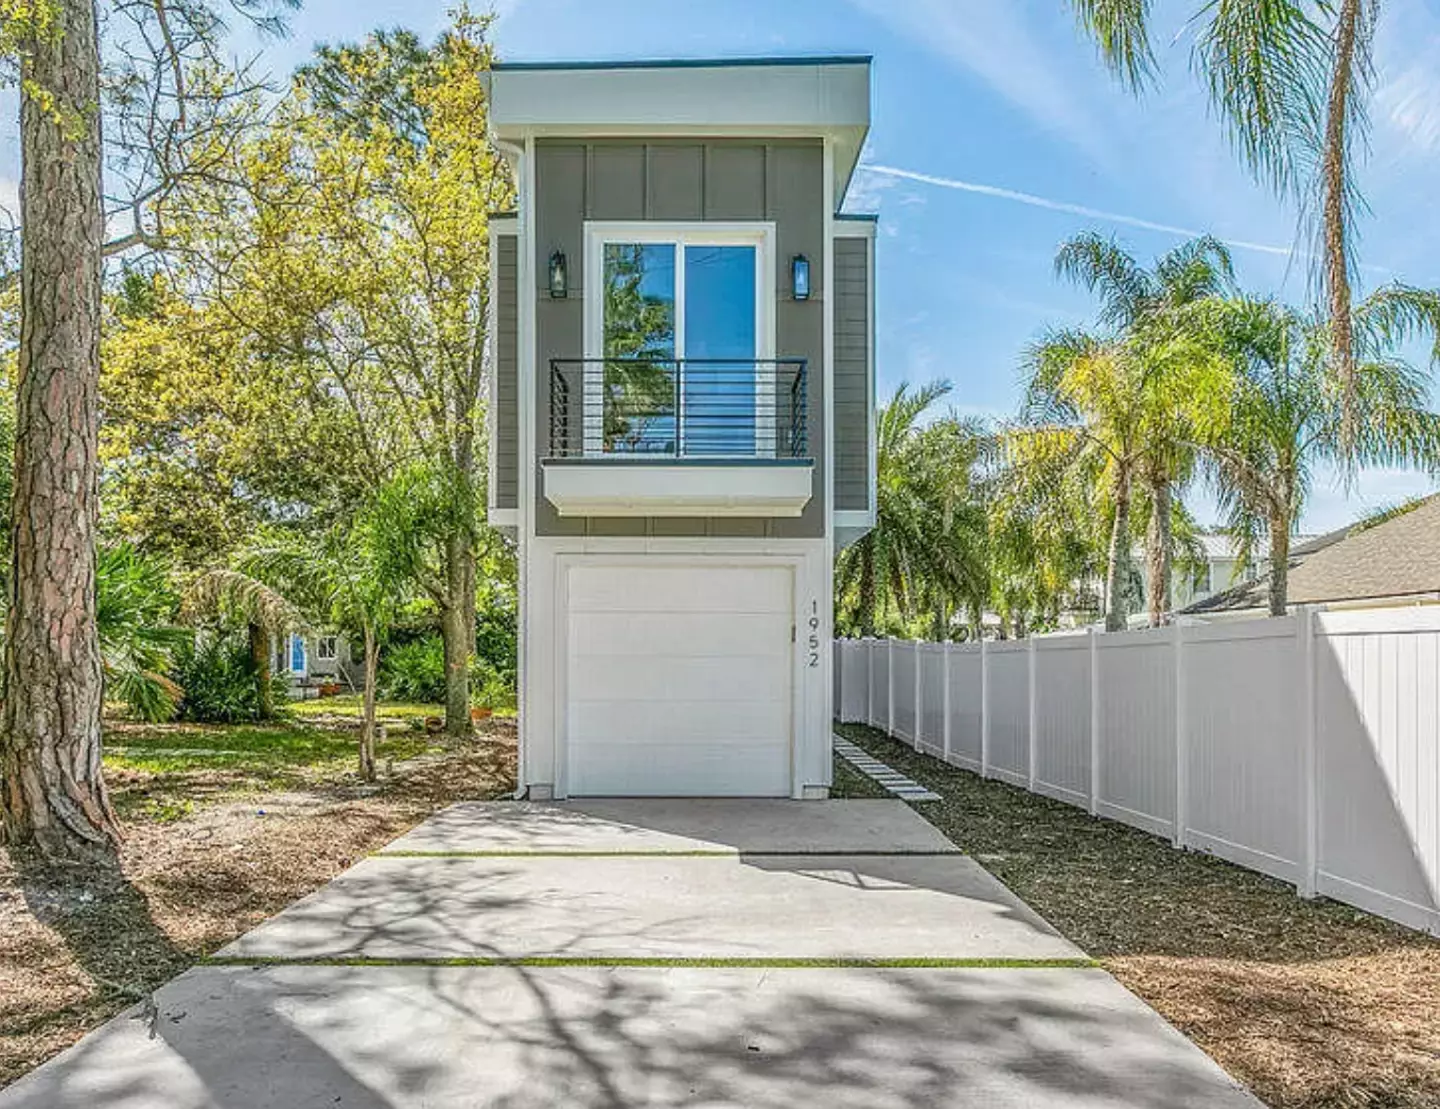 A 10-foot-wide home is up for sale in Florida ( Open House Optics)